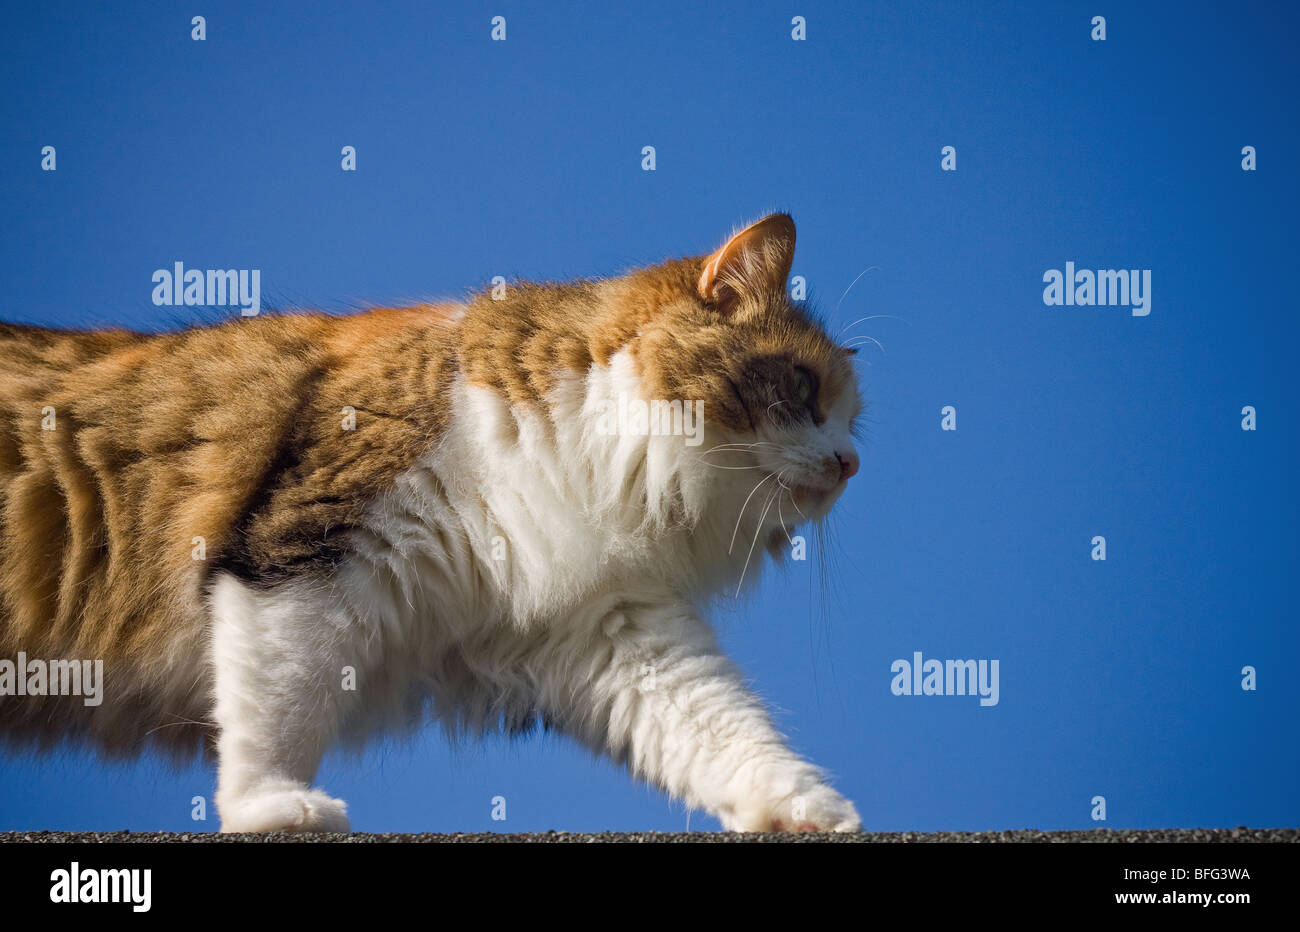 A cat prowling along set against a blue sky Stock Photo